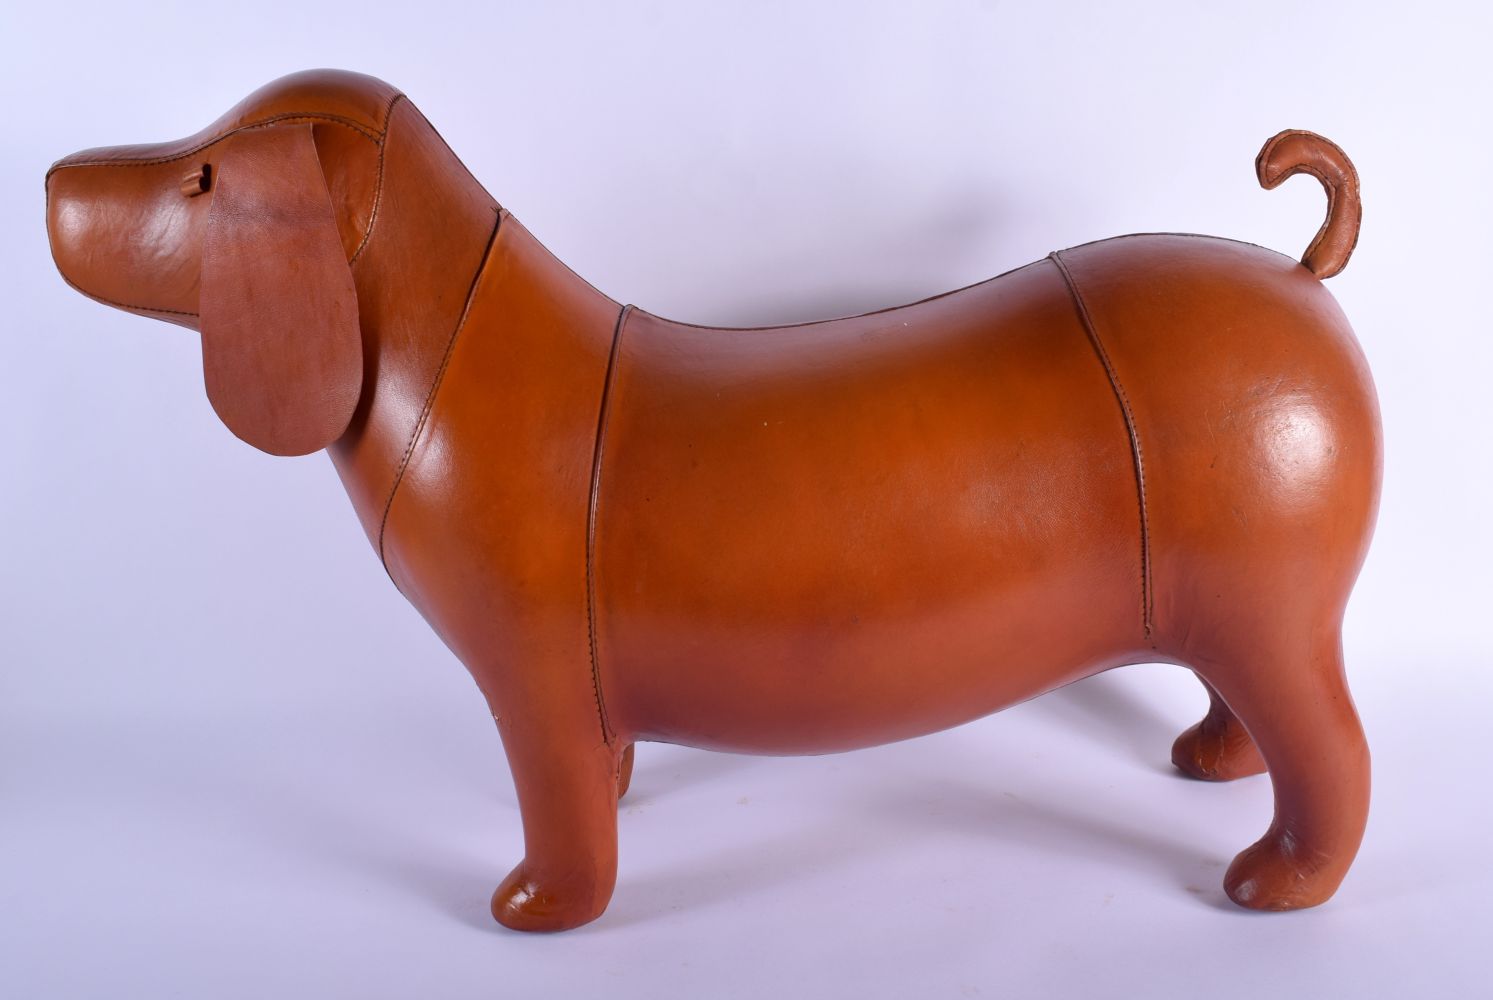 A CONTEMPORARY BROWN LEATHER DOG. 70 cm x 36 cm.